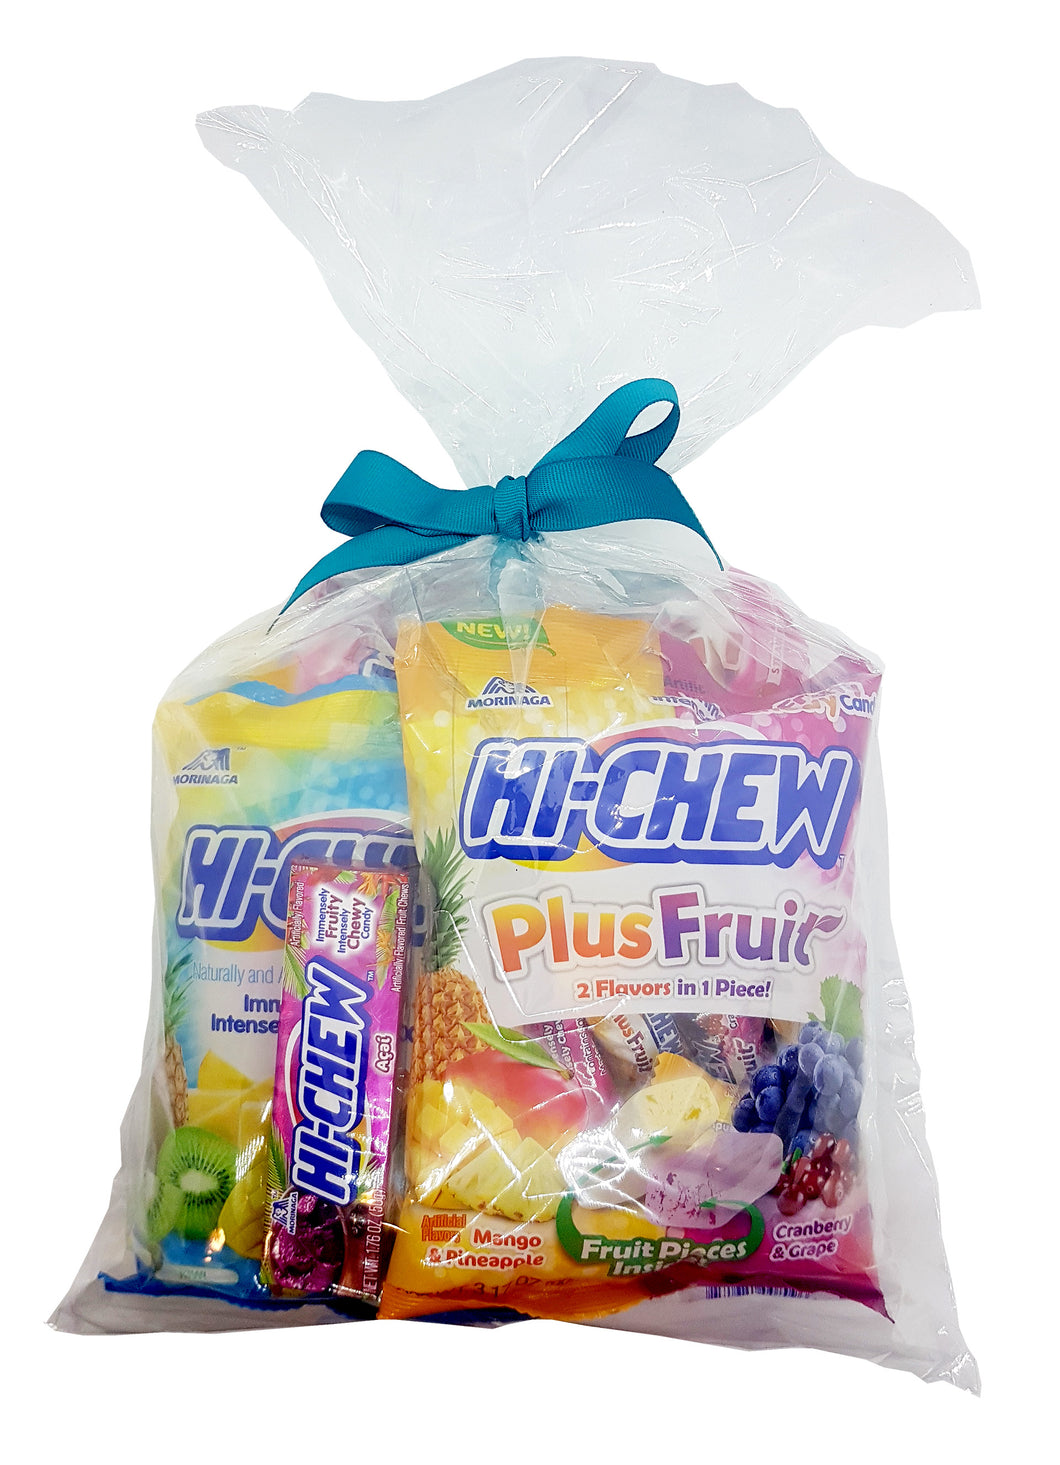 Hi-Chew Variety Pack Gift Set Chewy Fruit Candy by Morinaga 3.53 Oz.